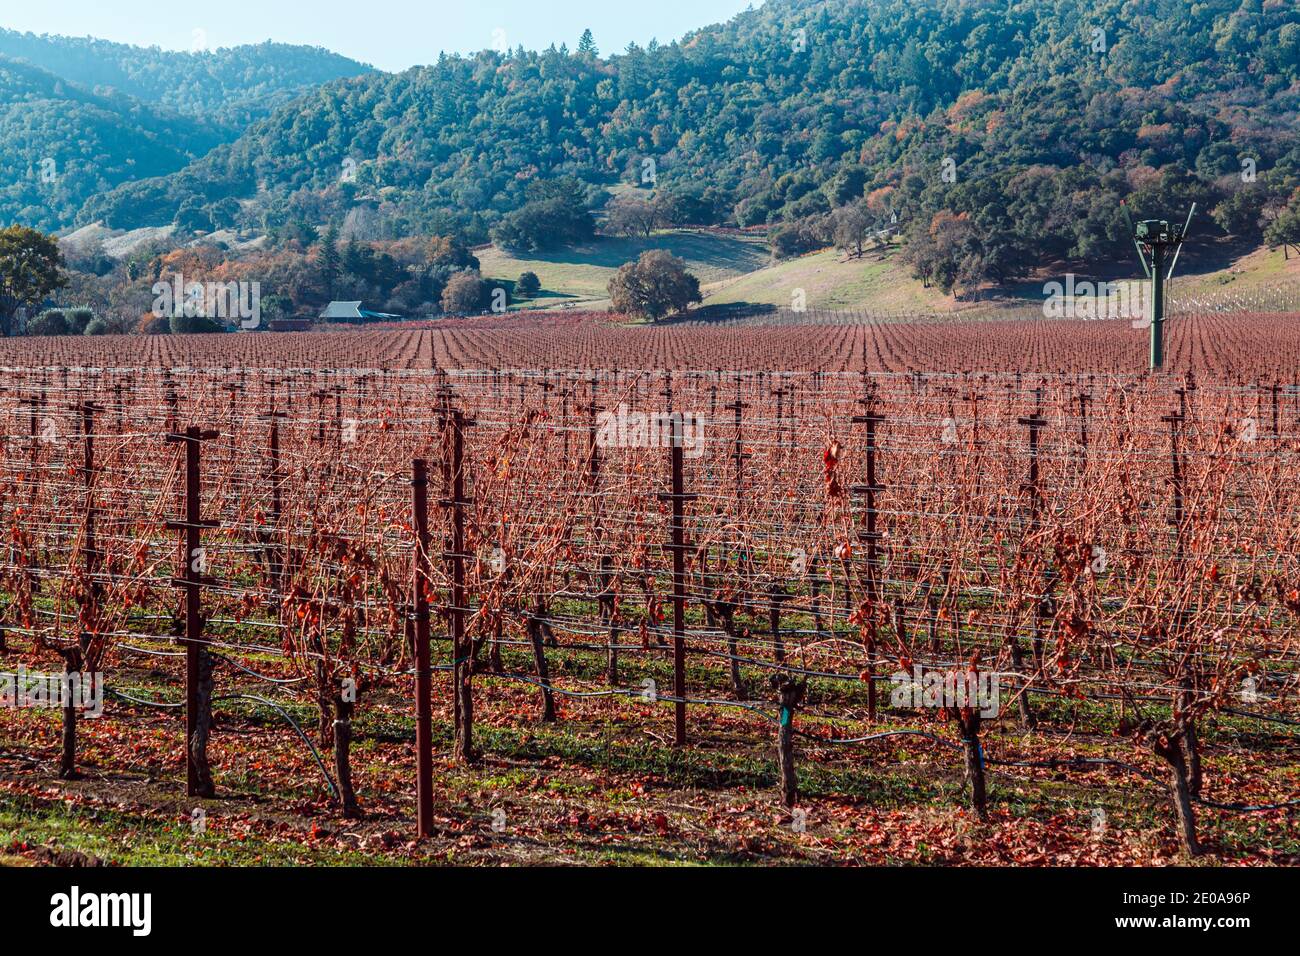 Vineyard in autumn colour, reds and russets with a green hillside background. Stock Photo